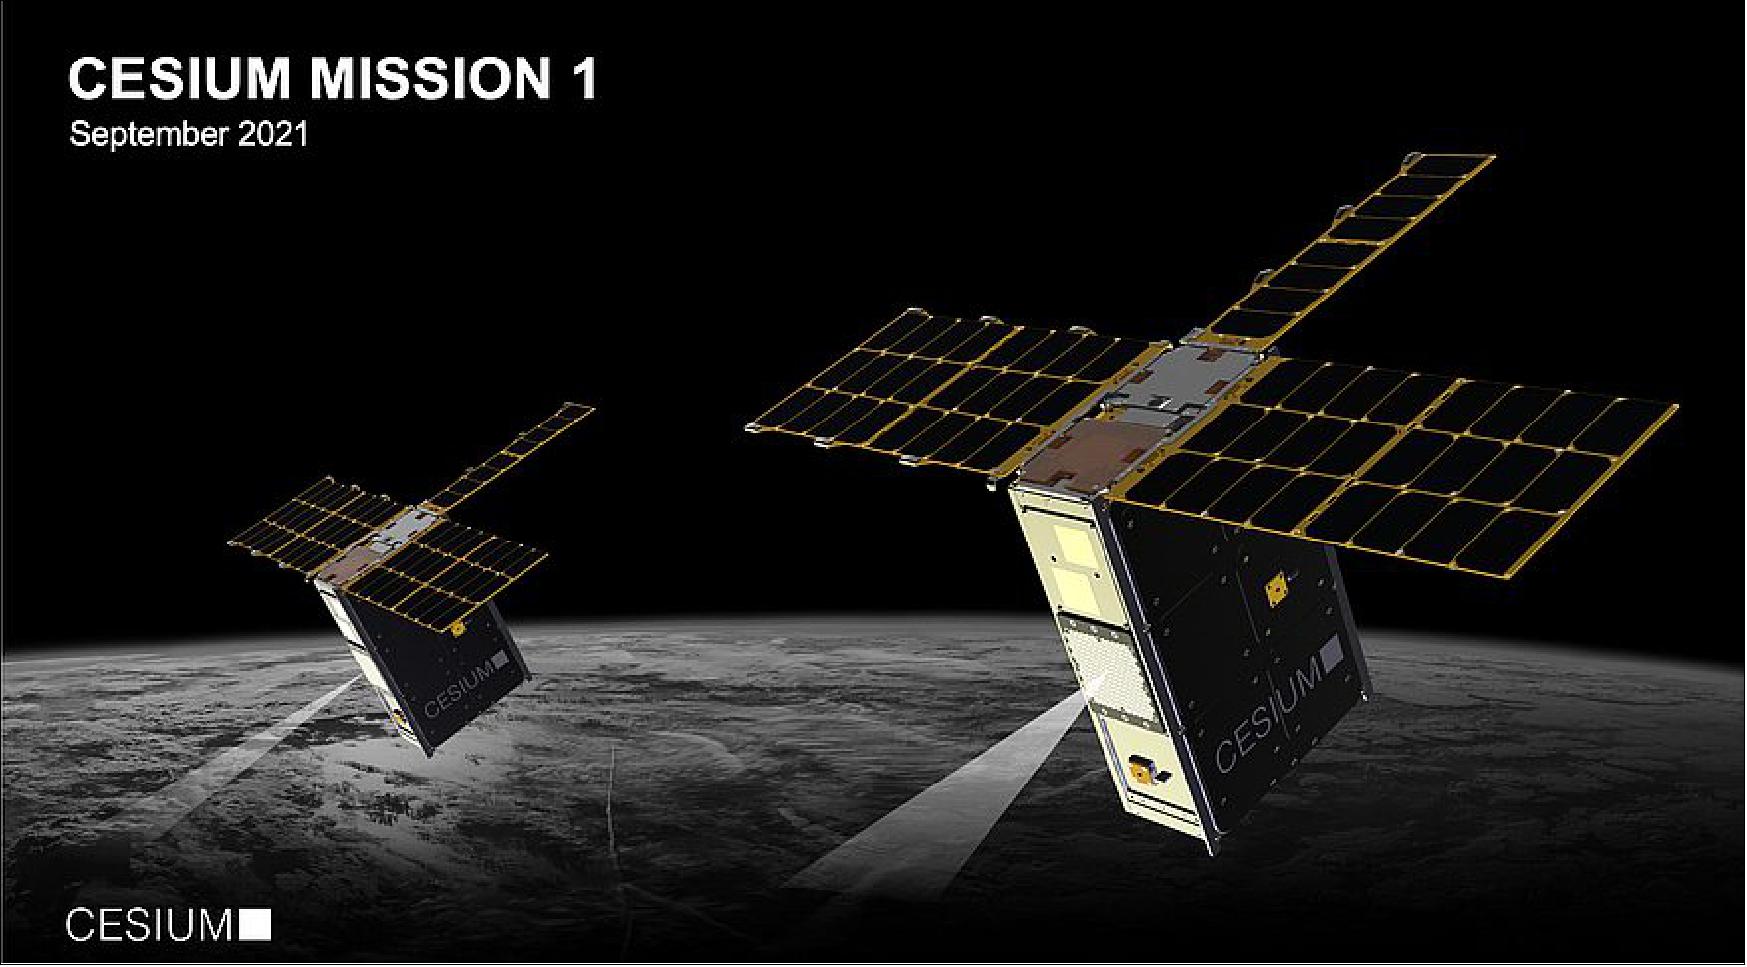 Figure 1: CesiumAstro plans to launch two 6U CubeSats in September to create an on-orbit platform for testing and experiments with electronically steerable, multibeam active phased array technology (image credit: CesiumAstro)